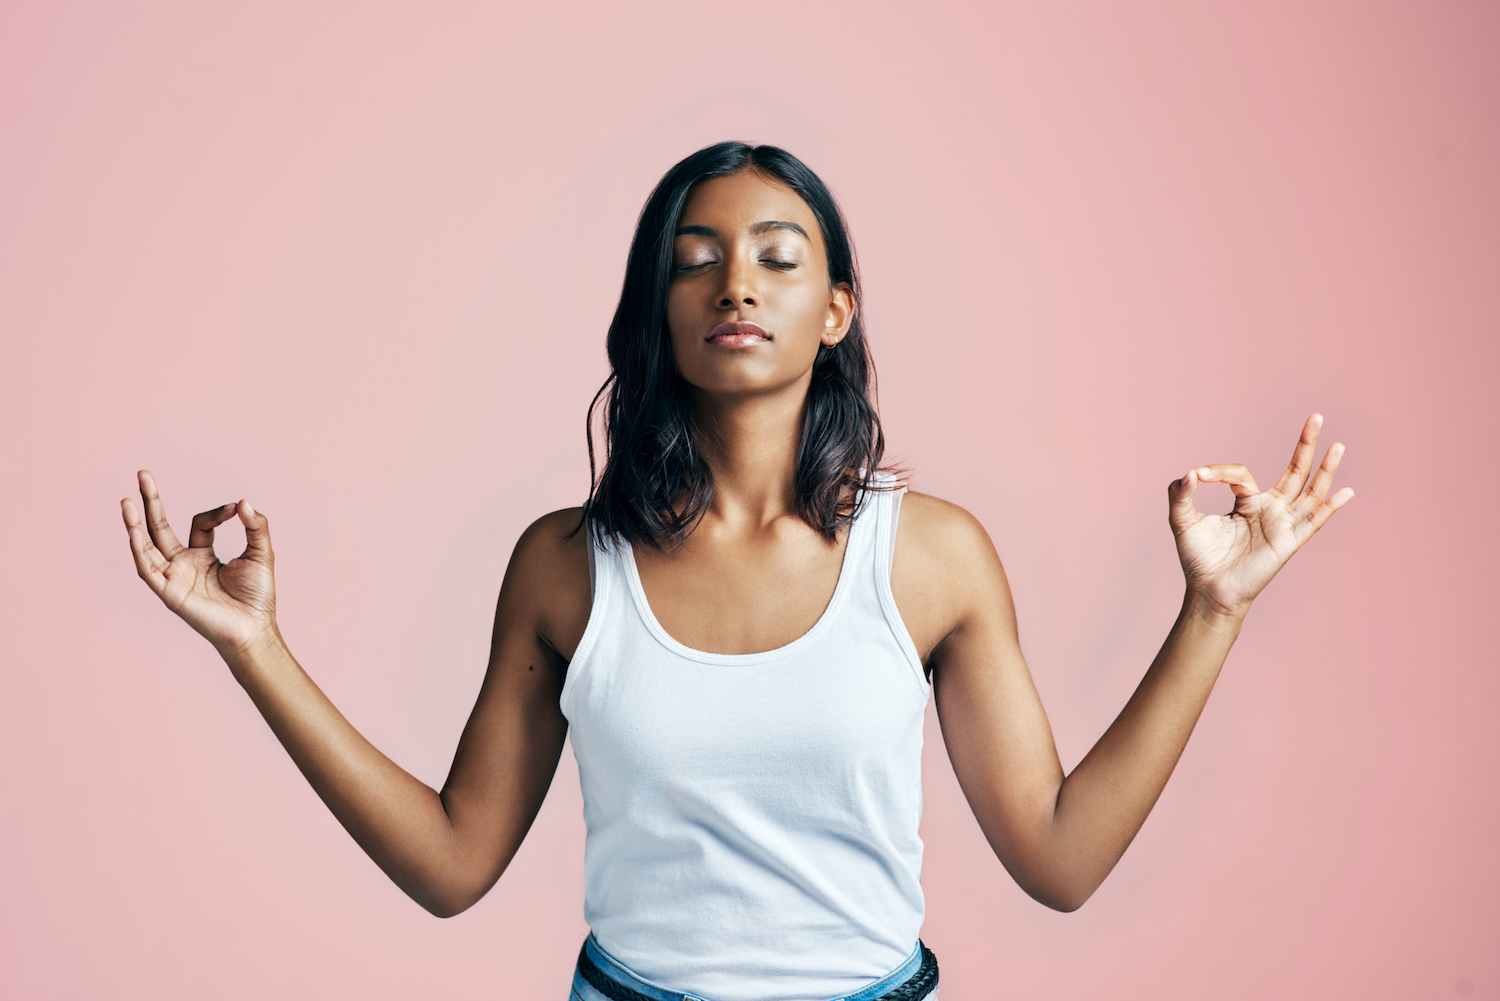 Brown woman in a white tanktop closes her eyes and holds her hands in a zen pose as she relaxes against a pink background